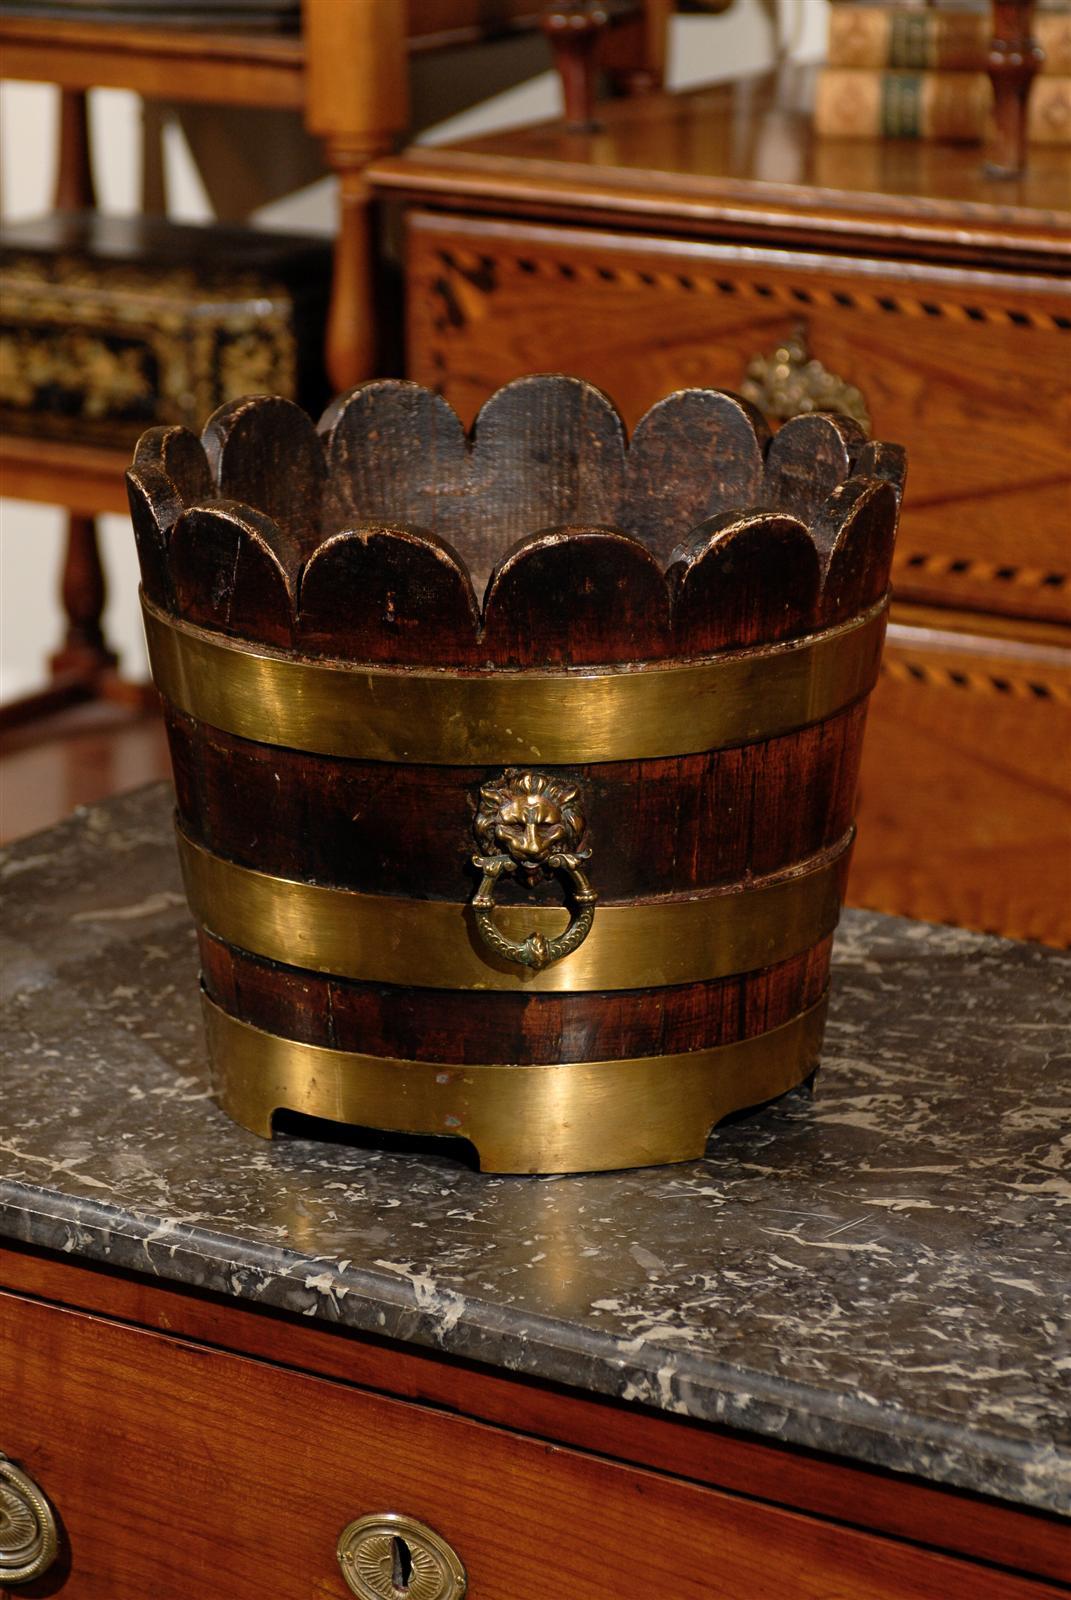 19th Century English Wooden Bucket with Brass Bands and Scalloped Top, circa 1900